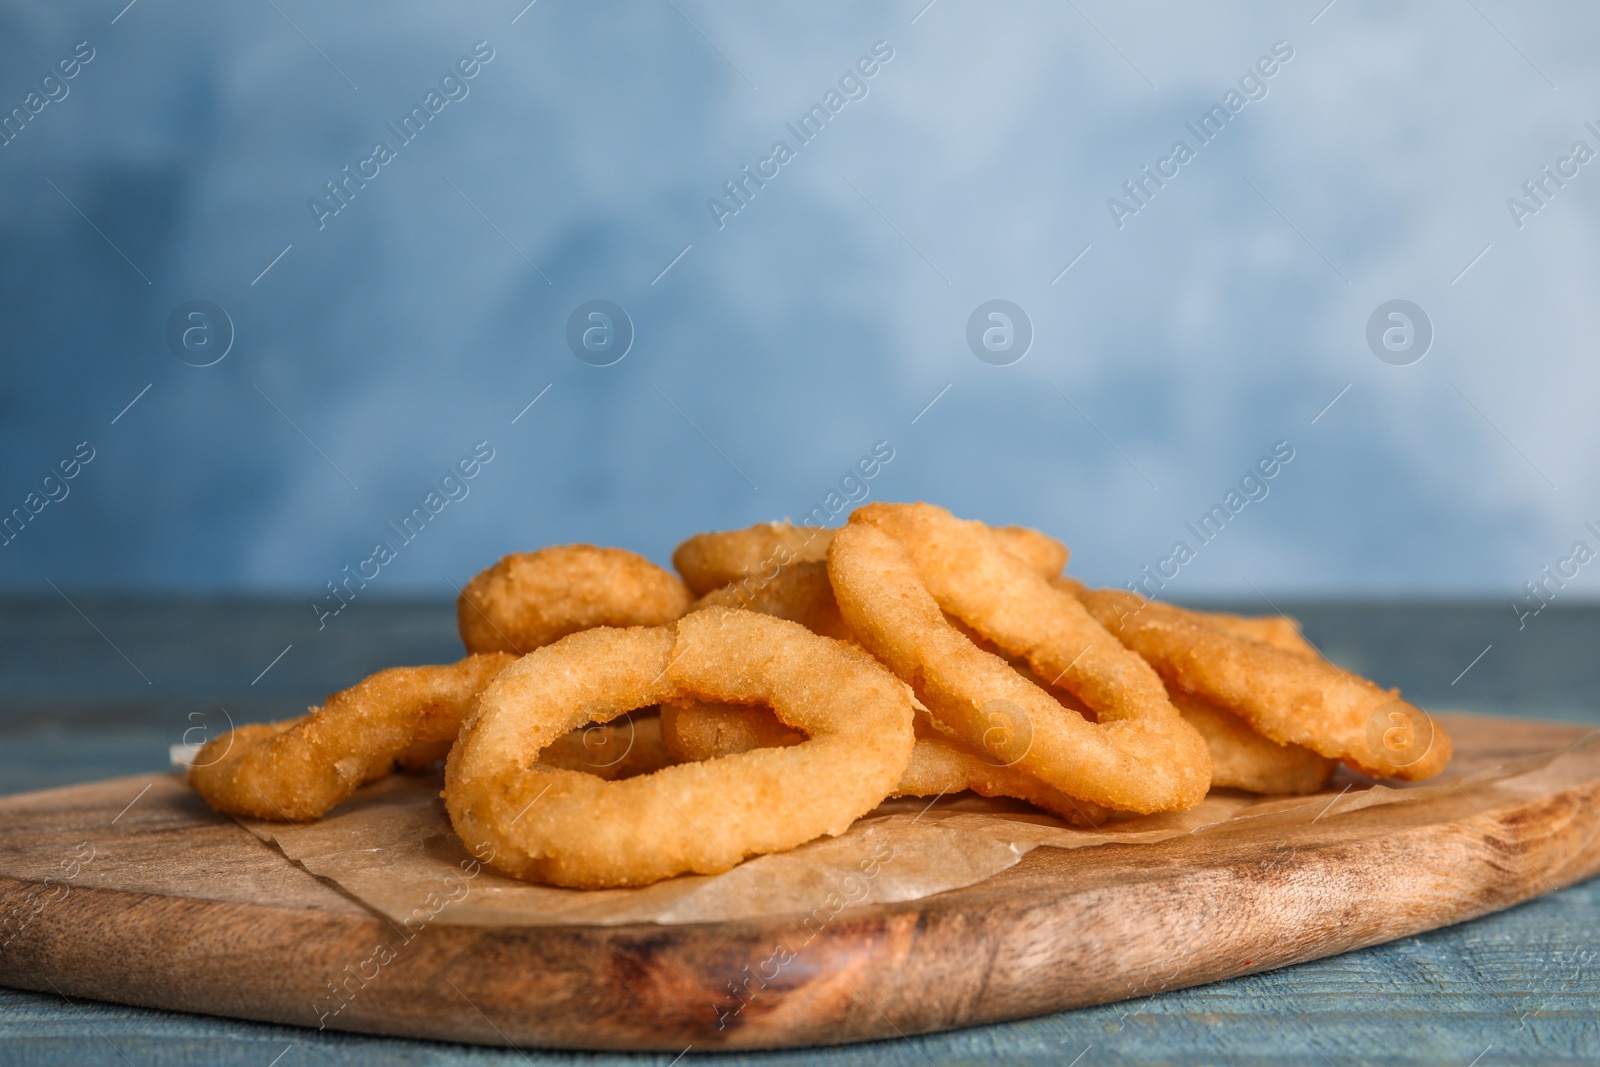 Photo of Fried onion rings served on blue wooden table